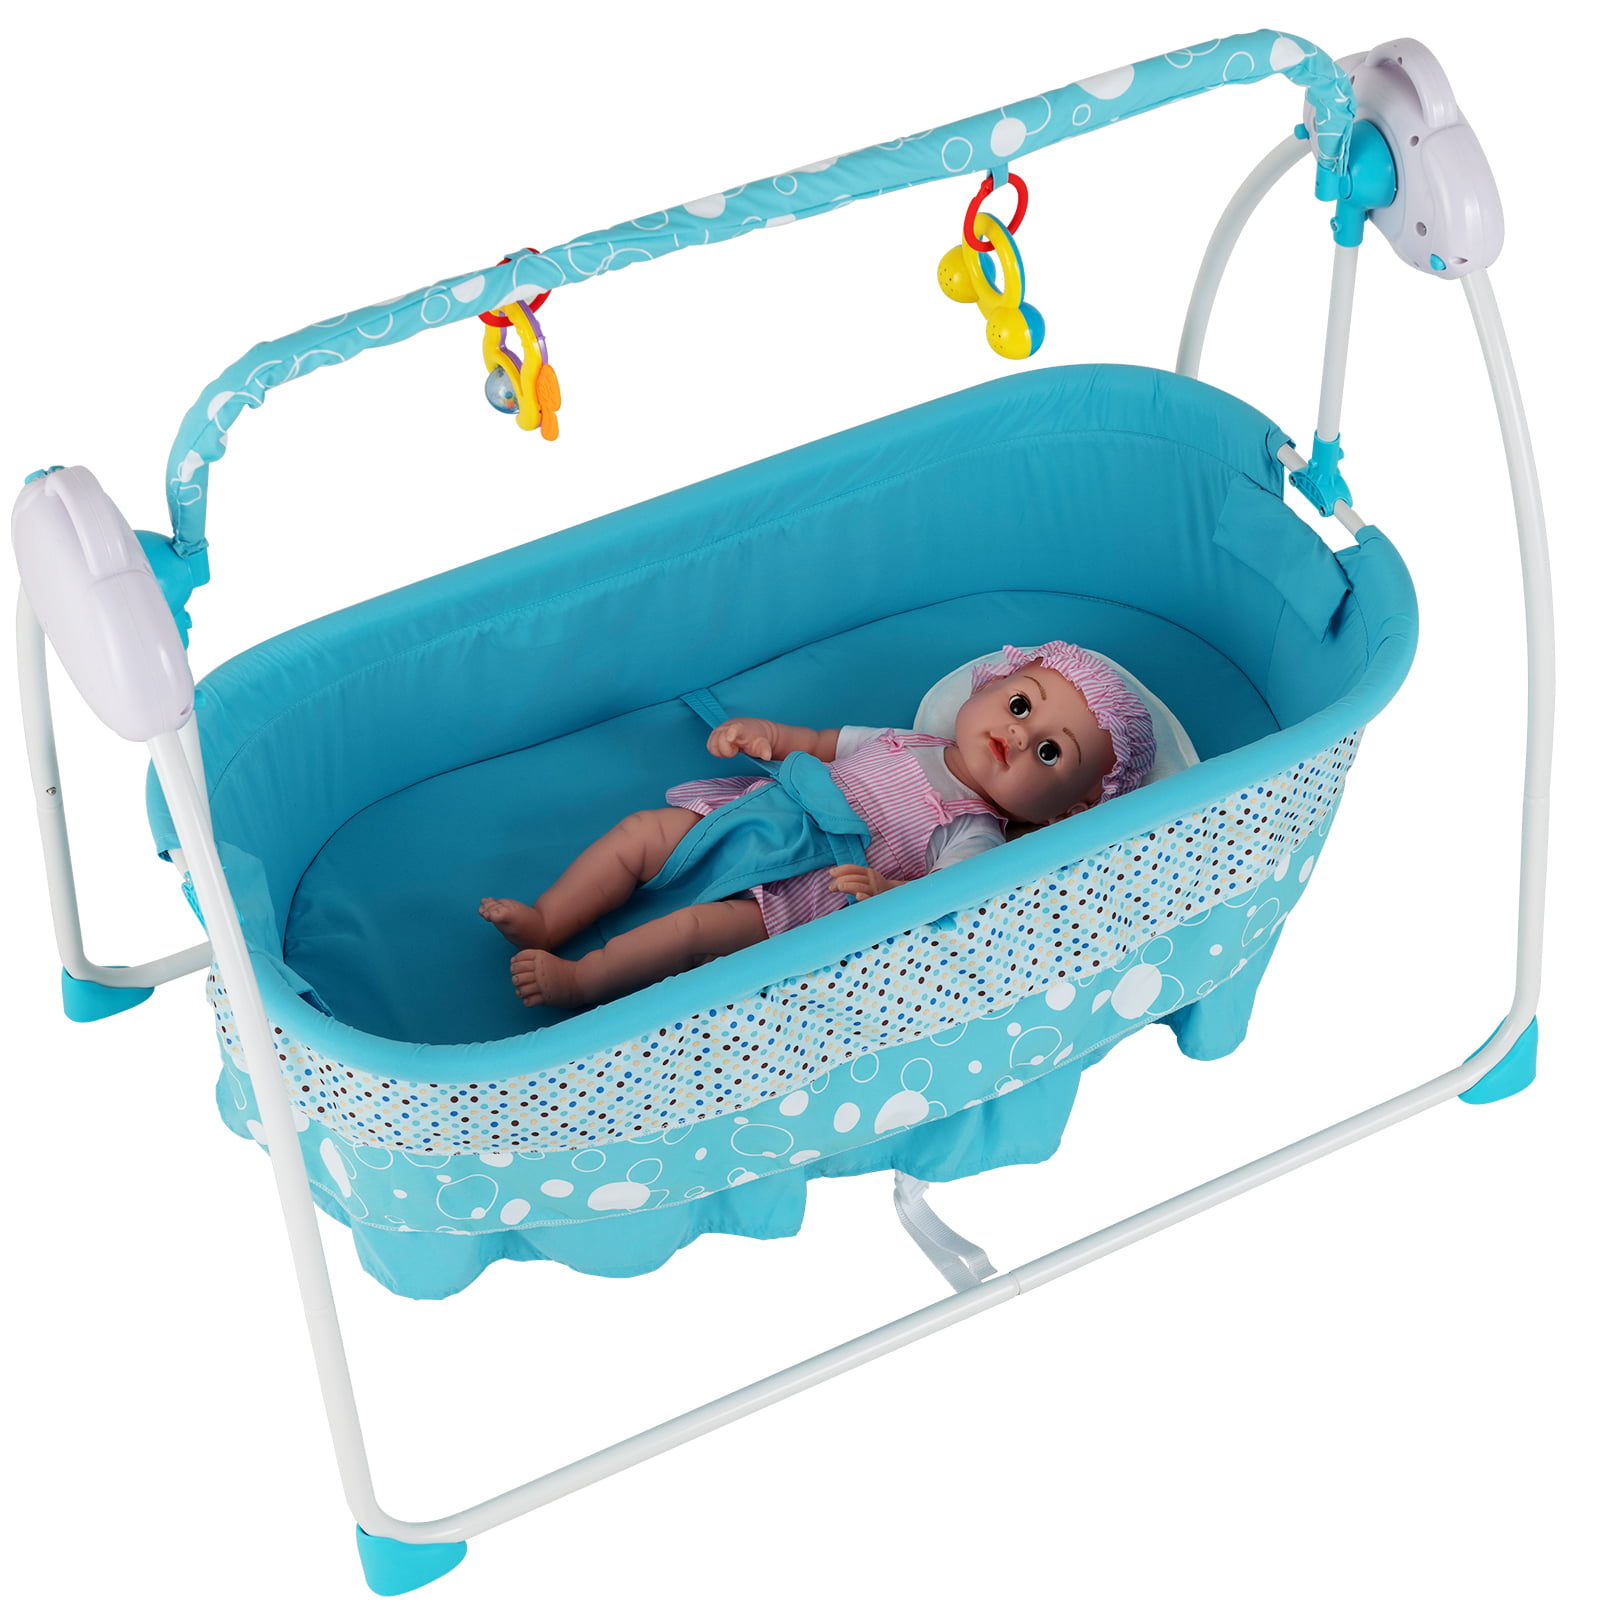 baby bed automatic swing